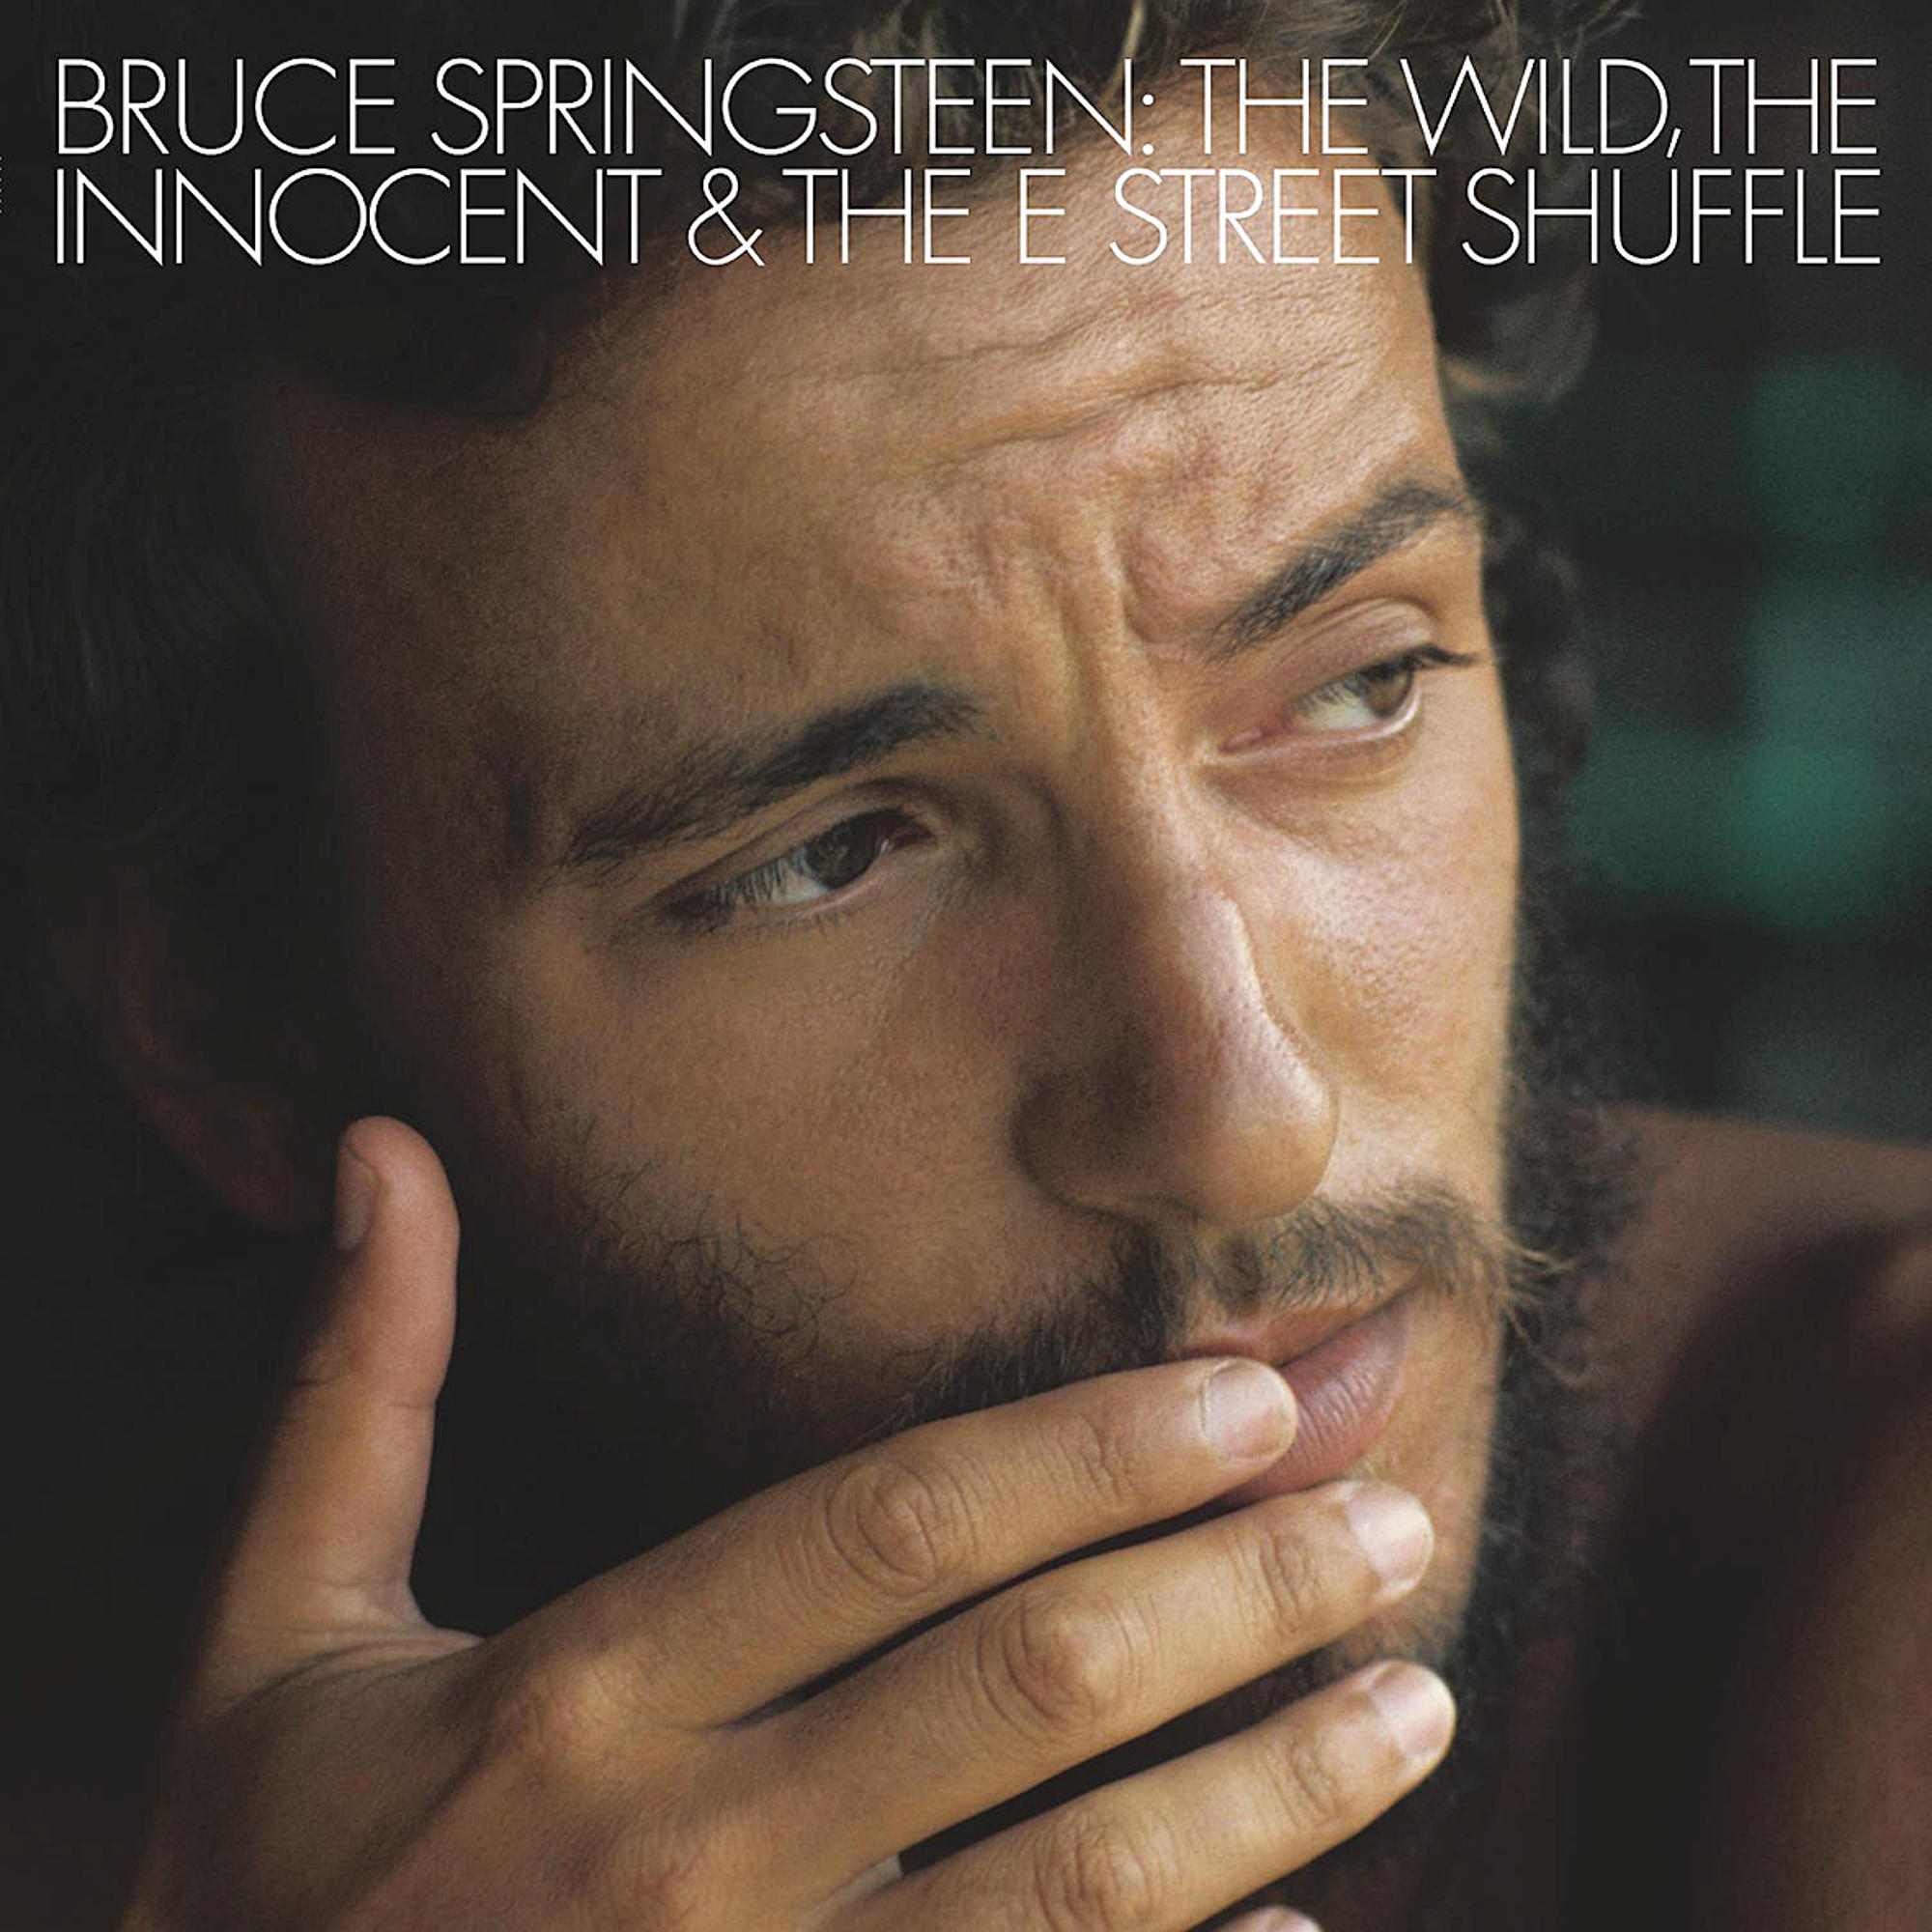 Bruce Springsteen - And Shuffle E The Street Wild, (Vinyl) The - The Innocent